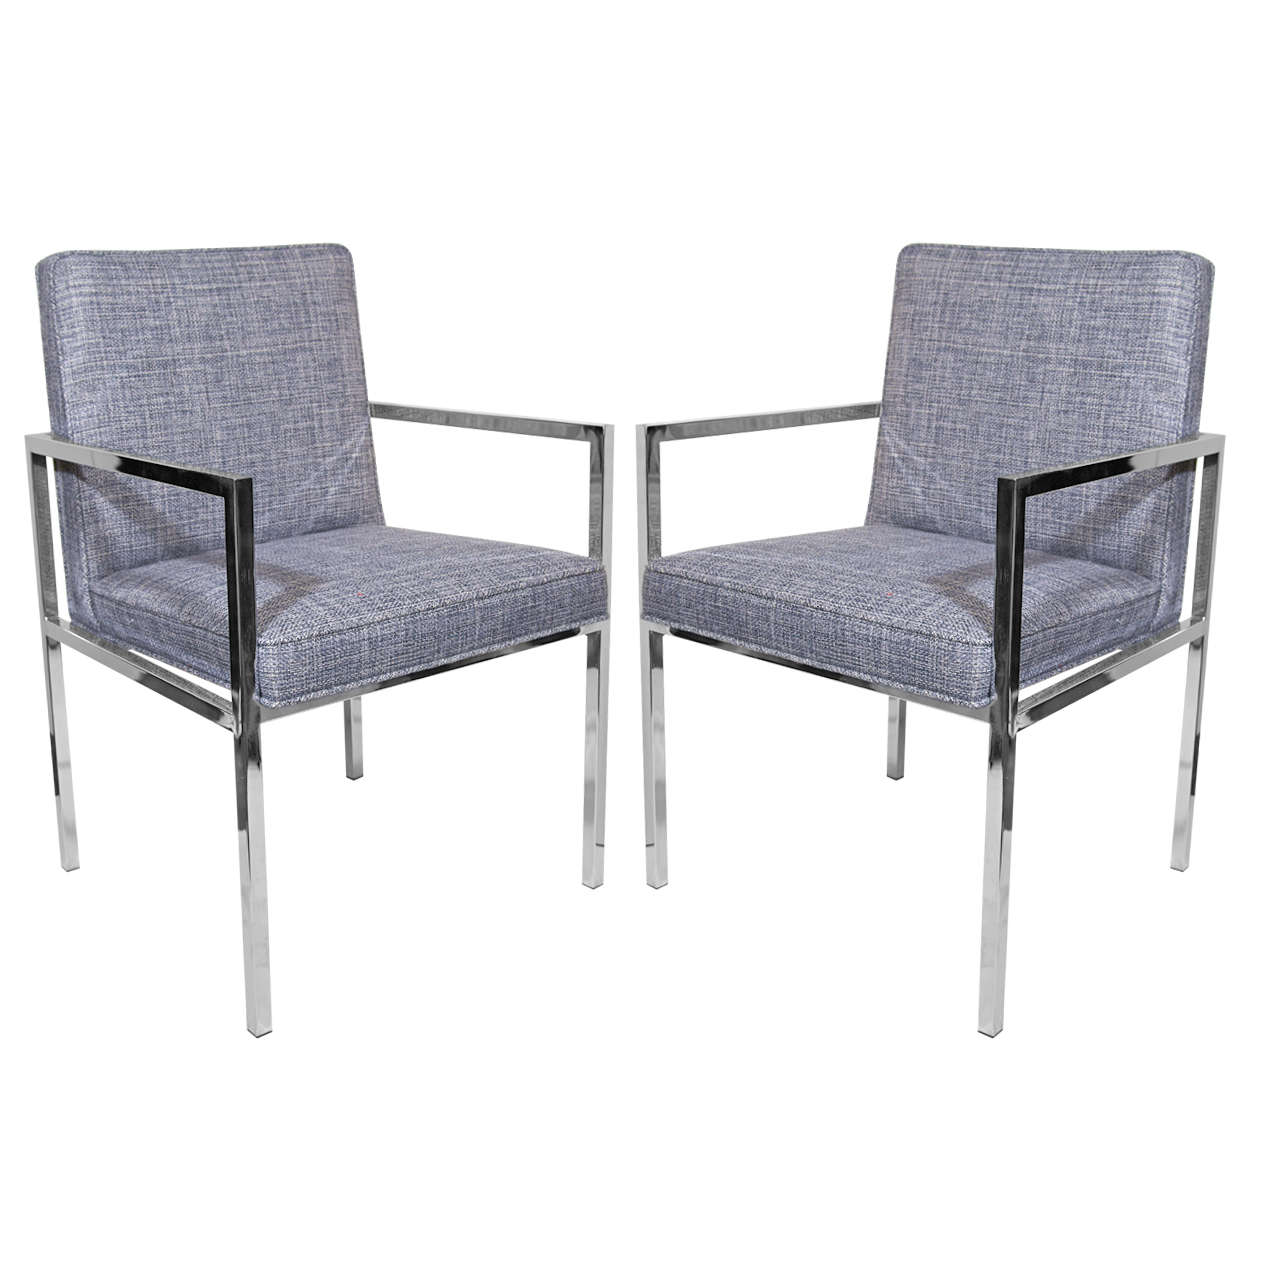 Pair of Mid-Century Modern Side Chairs by Milo Baughman